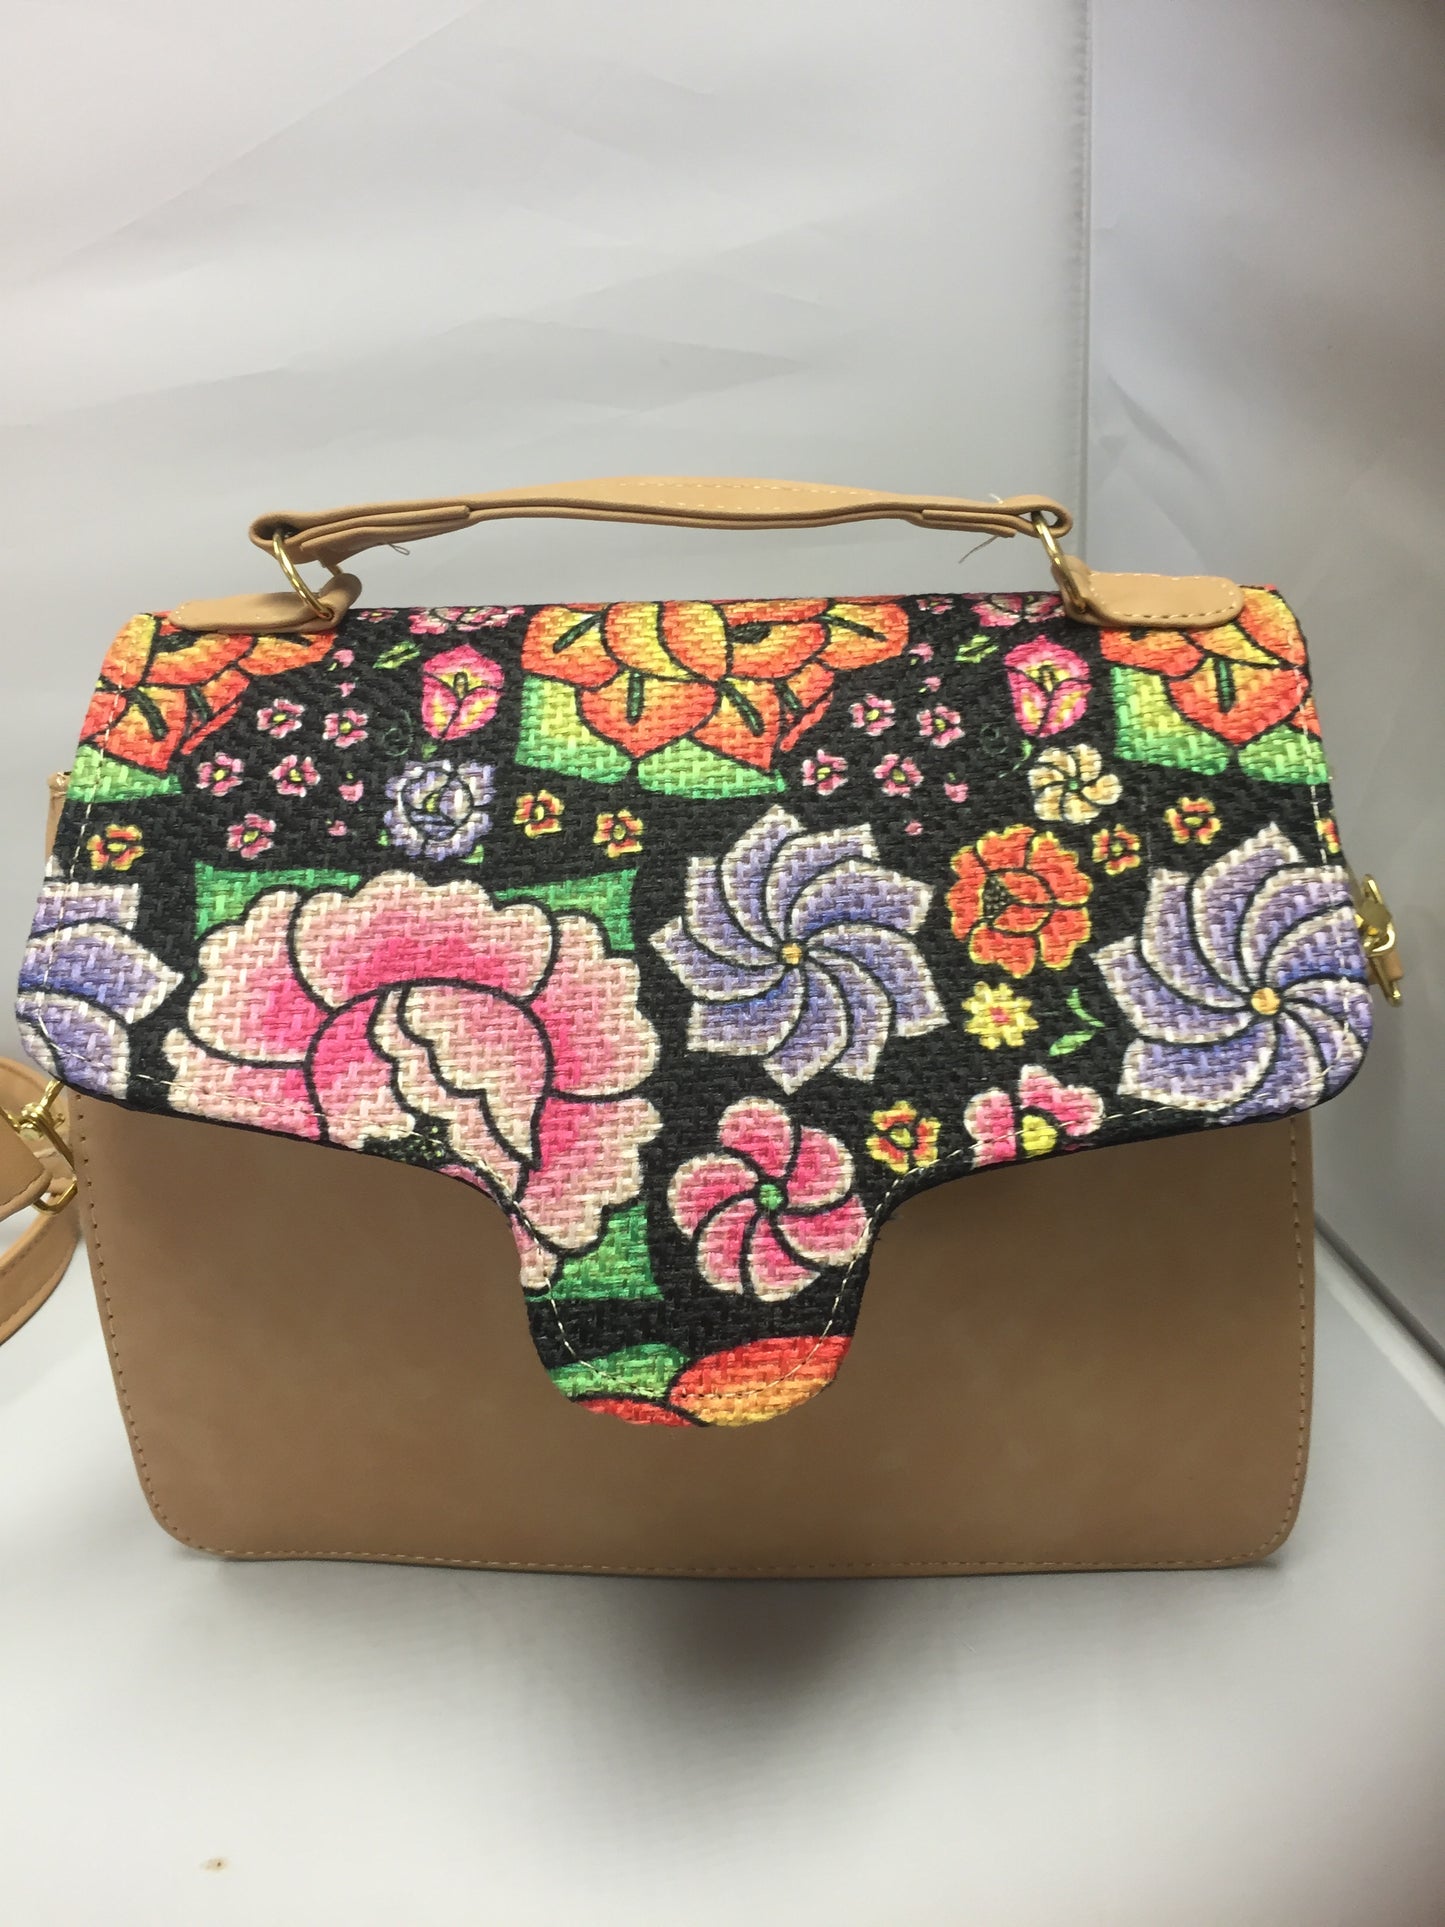 Beautiful Purse with unique  flower  design on top